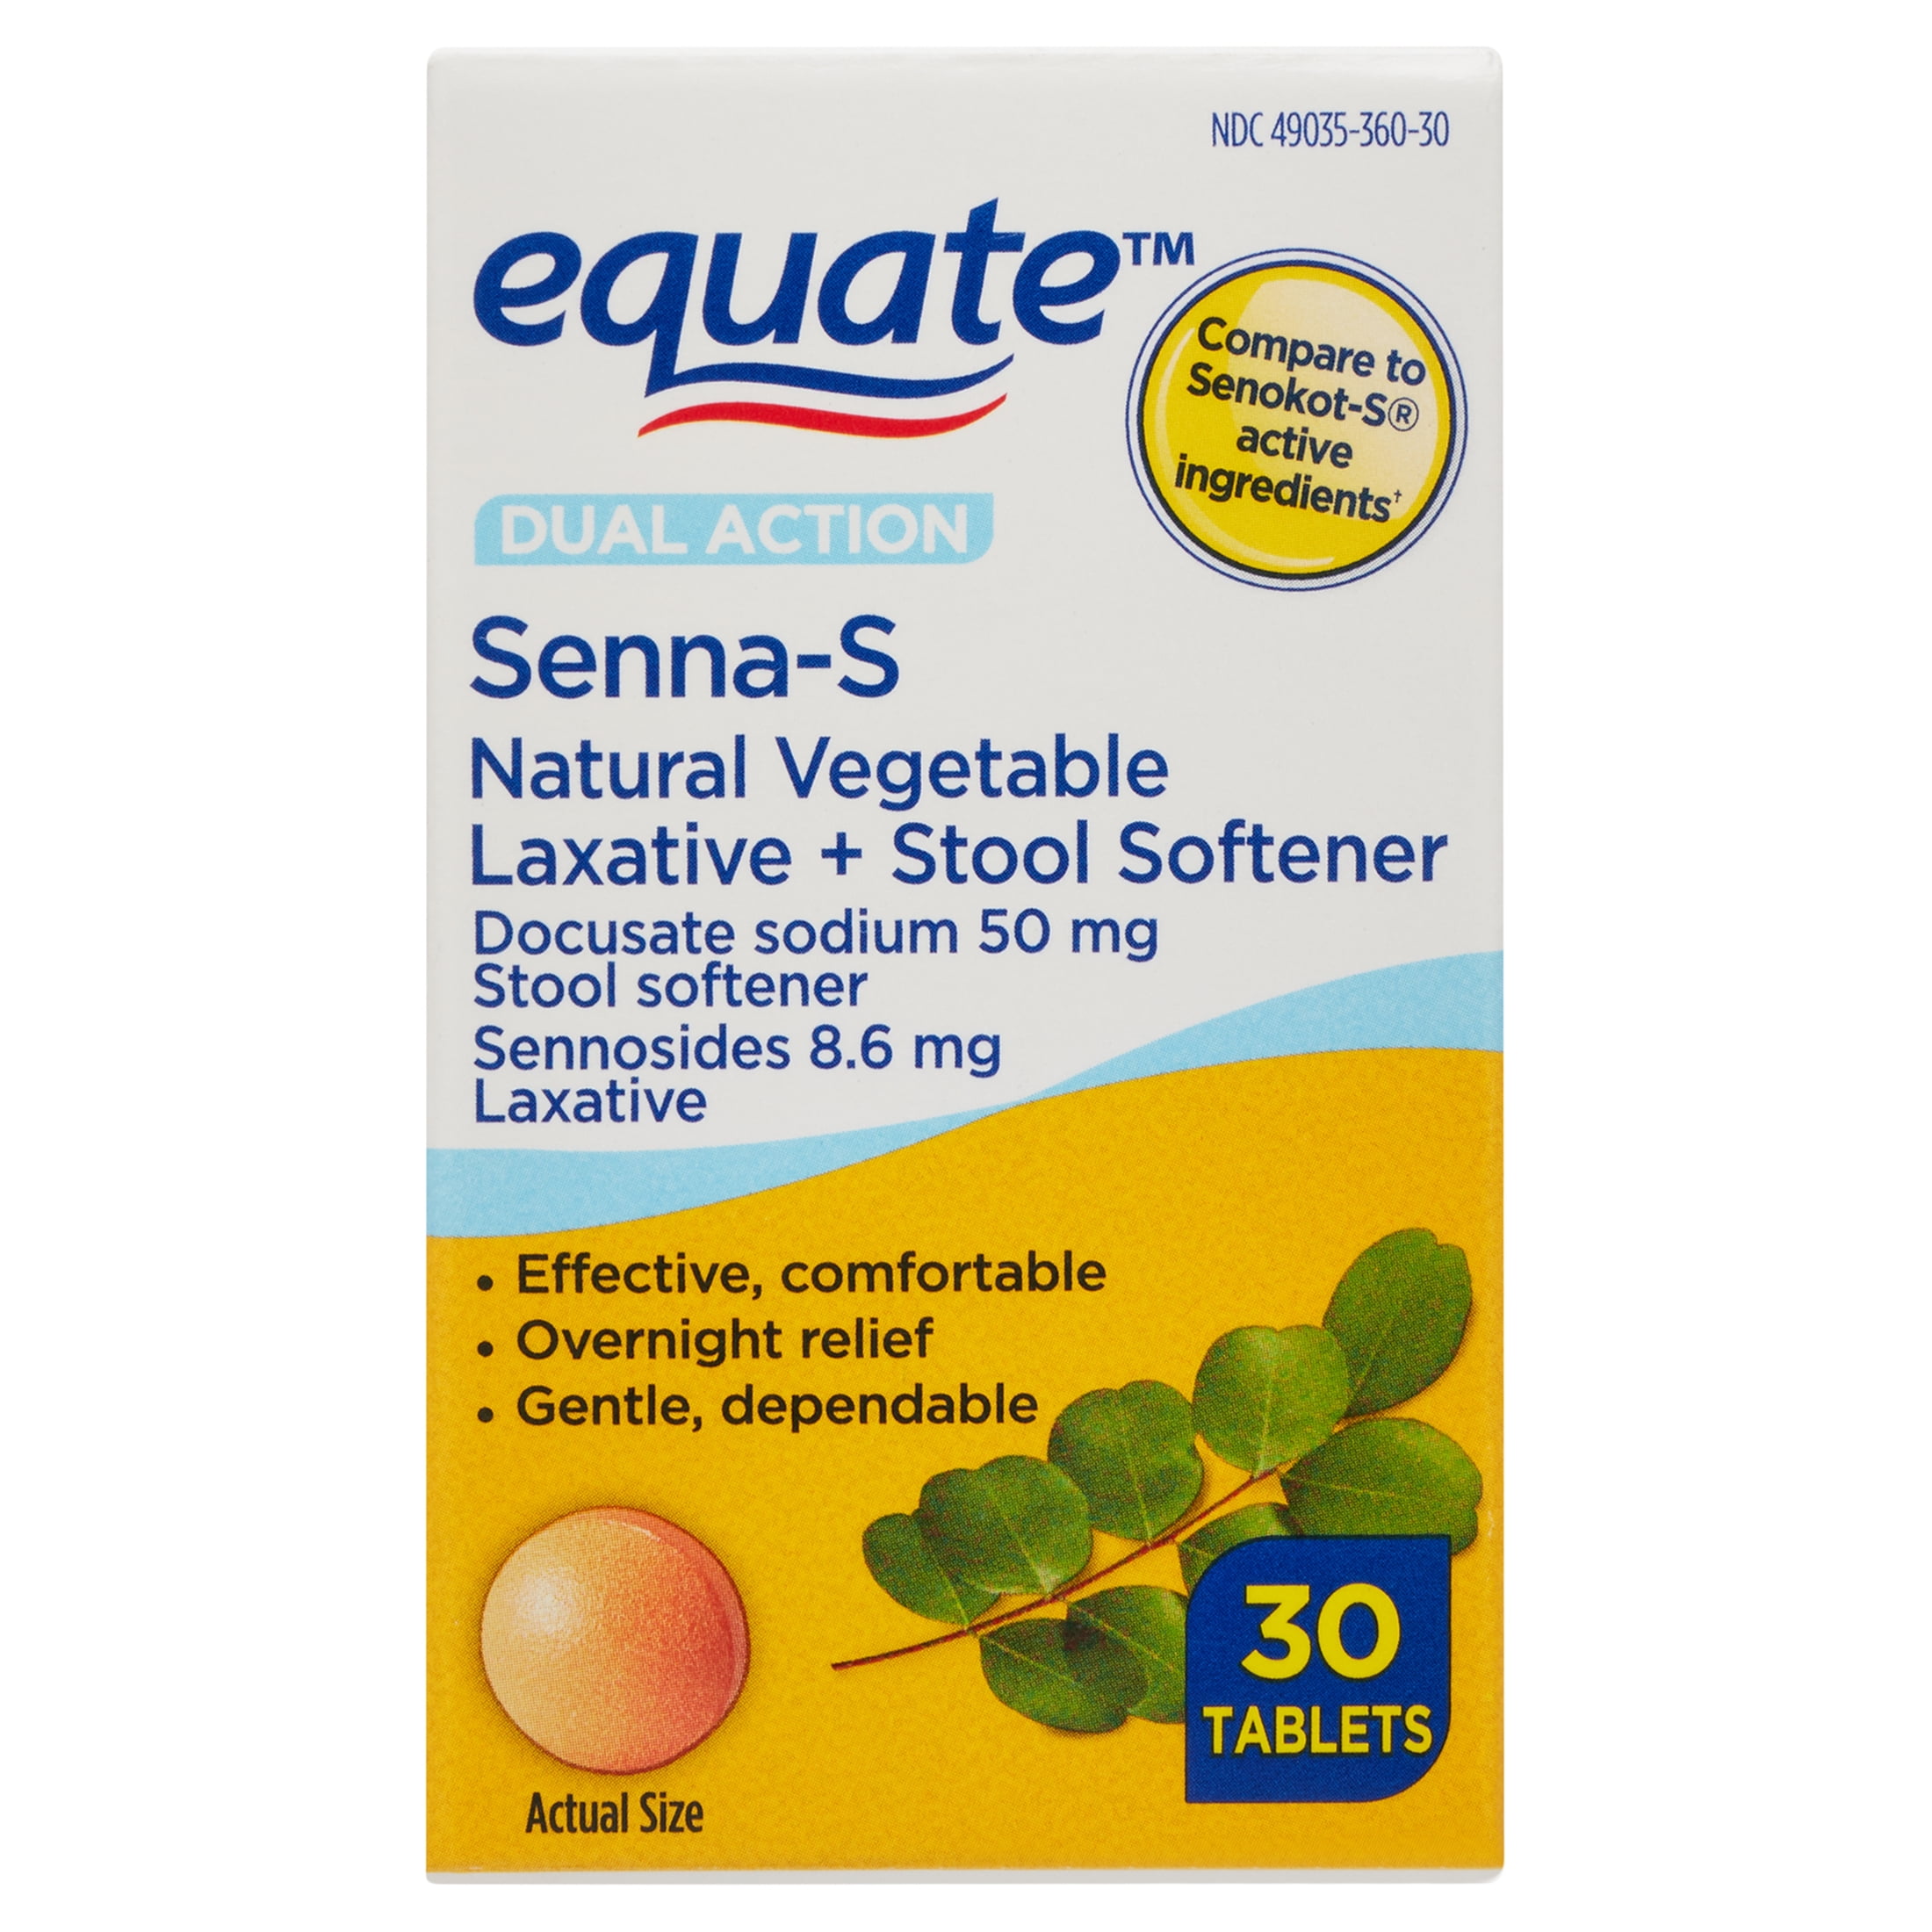 Equate Dual Action Senna-S Natural Vegetable Laxative + Stool Softener Tablets for Constipation, 30 Count